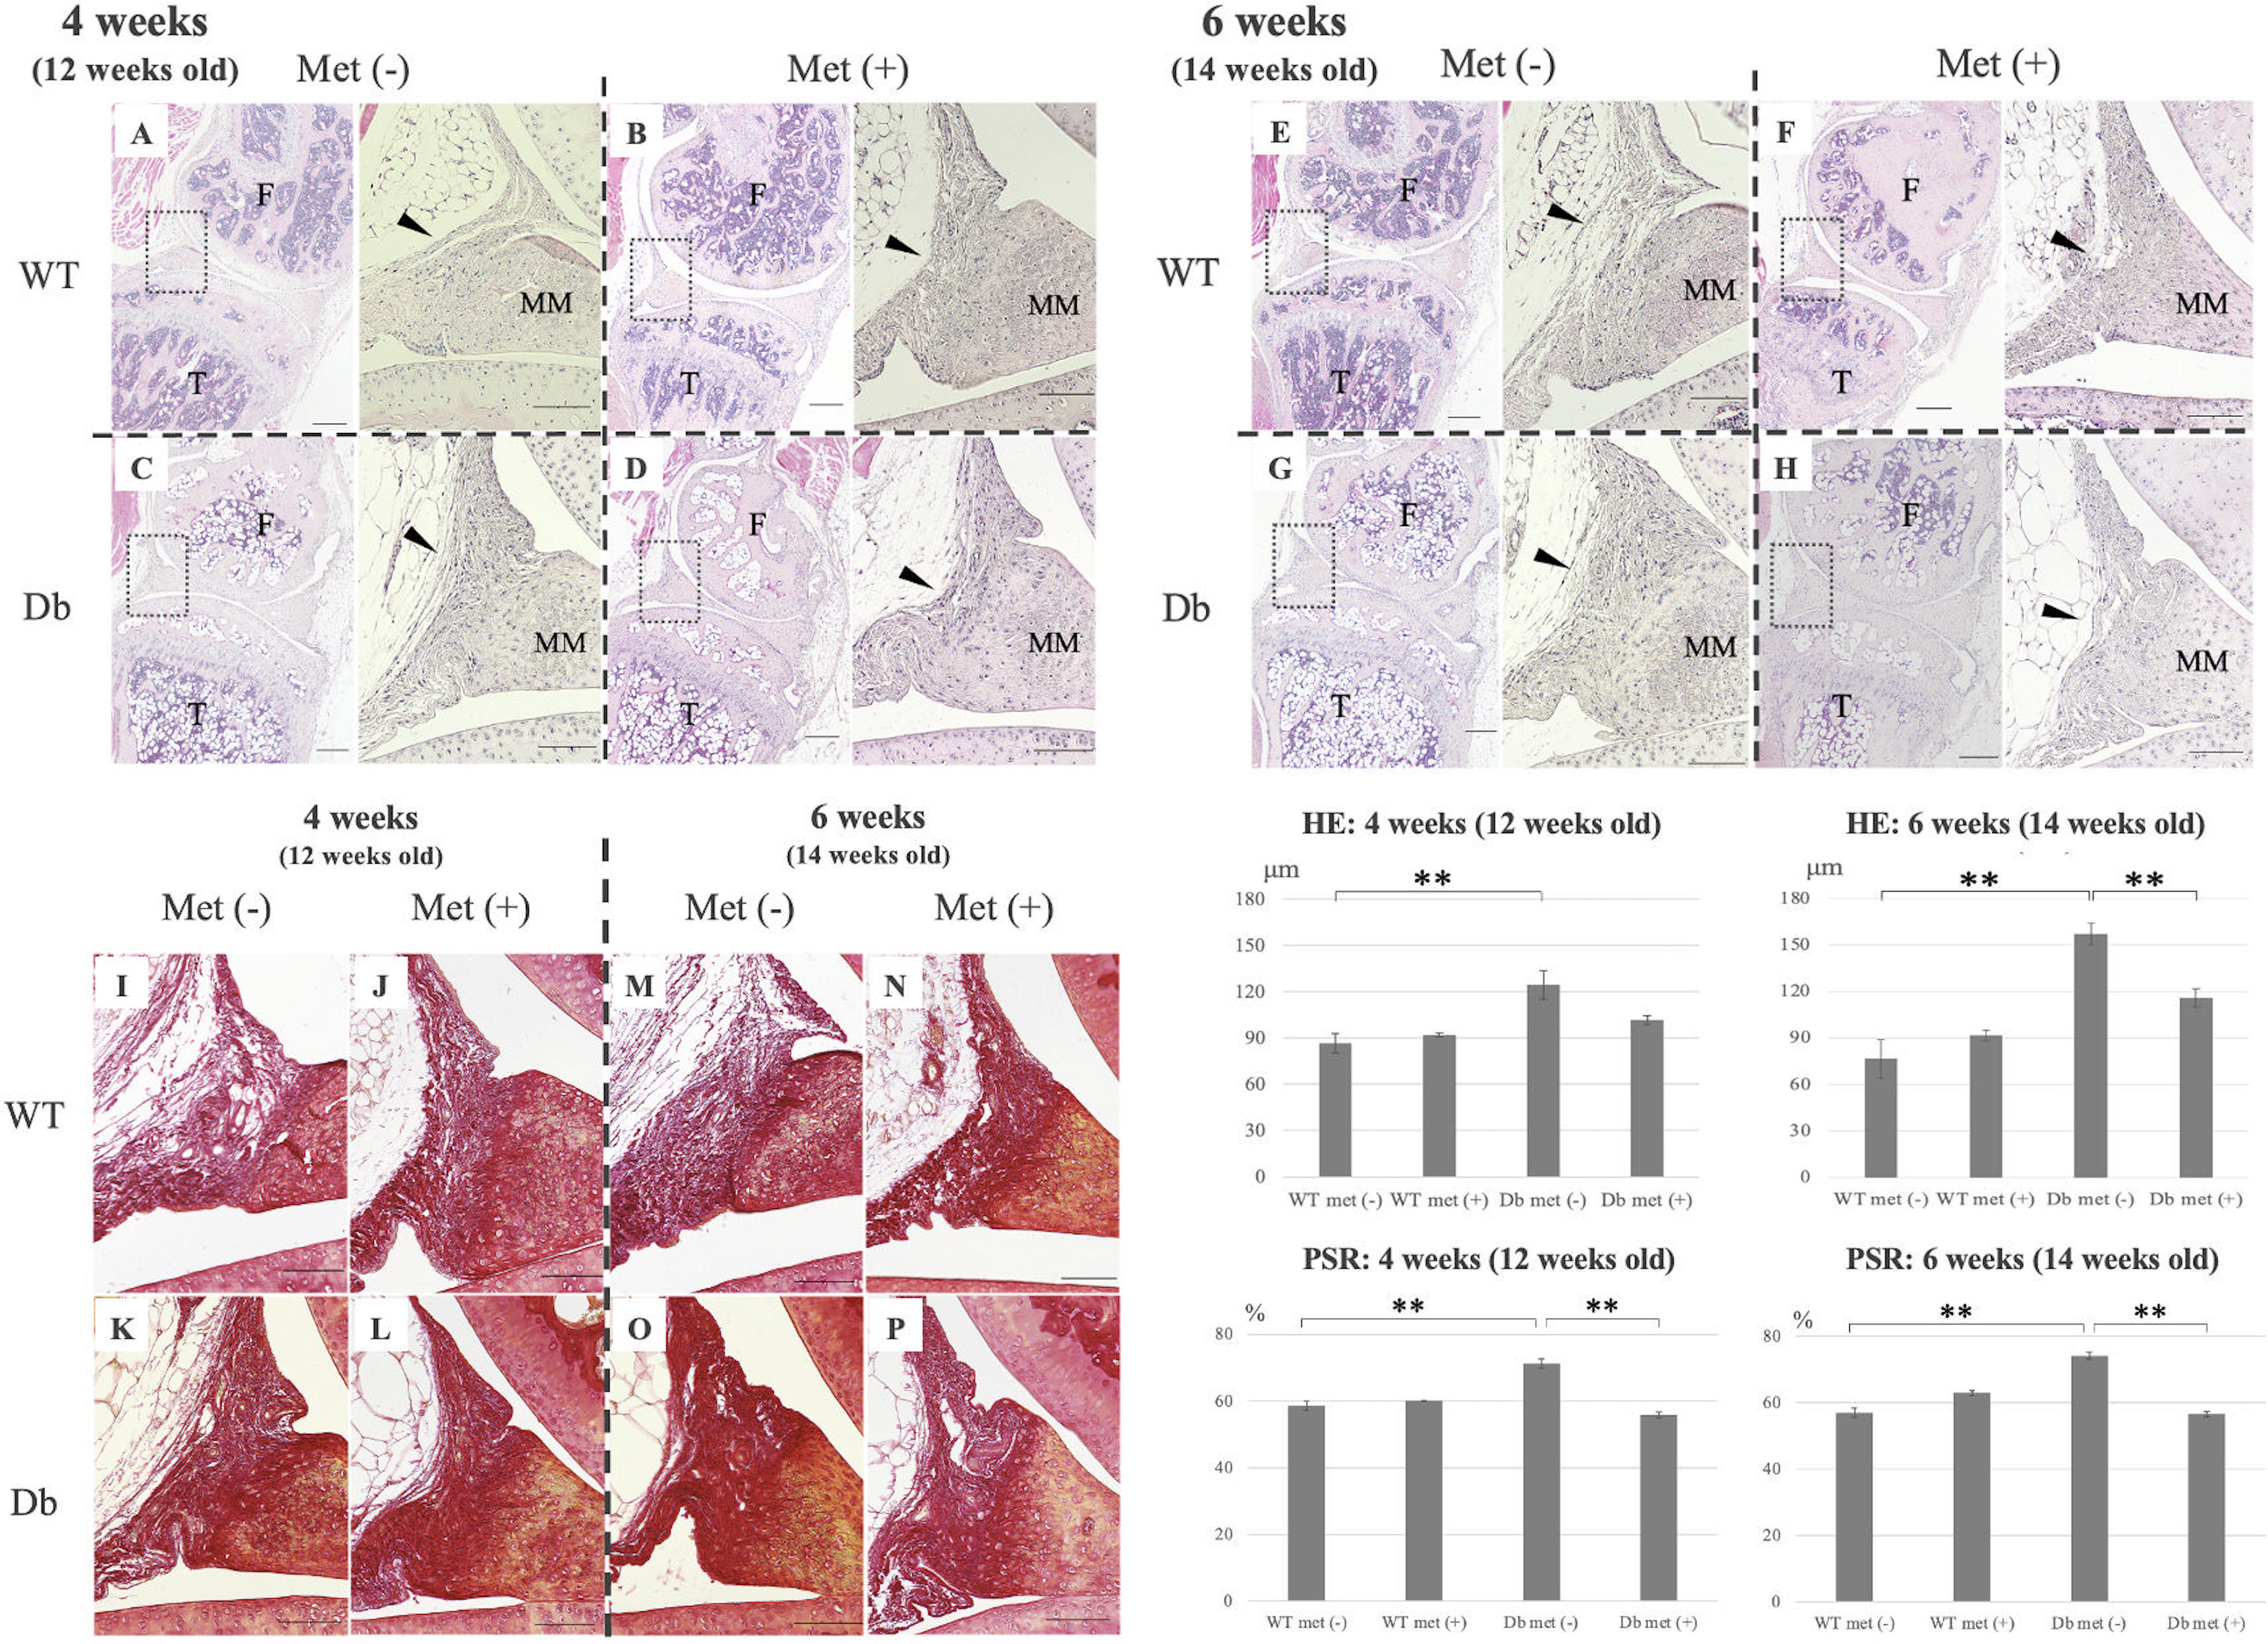 Fig. 3 
            Histological analysis of the effect of metformin on the knee joint capsule. Haematoxylin and eosin stained sections of knee joint capsule from each group after four and six weeks (low magnification, 20x). Arrows indicate posterior knee joint capsule. Each right-side image shows a higher magnification image (400x) of the dotted box of the corresponding left-side image (scale bar: 300 μm (right), 100 μm (left)). **p < 0.01; n = 6. At four weeks (12-weeks-old) A: WT met(-), B: WT met(+), C: Db met(-), D: Db met(+); at six weeks (14-weeks-old) E: WT met(-), F: WT met(+), G: Db met(-), H: Db met(+). Picrosirius Red-stained (PRS) sections (scale bar: 100 μm, magnification 400x) of posterior knee joint capsule for each group at four and six weeks of metformin treatment. The percentage of collagen fibres in the posterior capsule at four and six weeks was measured as the ratio of the total area stained red by PRS to the area of the posterior capsule. Data are expressed as mean and standard error. **p < 0.01; n = 6. At four weeks (12-weeks-old) I: WT met(-), J: WT met(+), K: Db met(-), L: Db met(+); at six weeks (14-weeks-old) M: WT met(-), N: WT met(+), O: Db met(-), P: Db met(+).
          